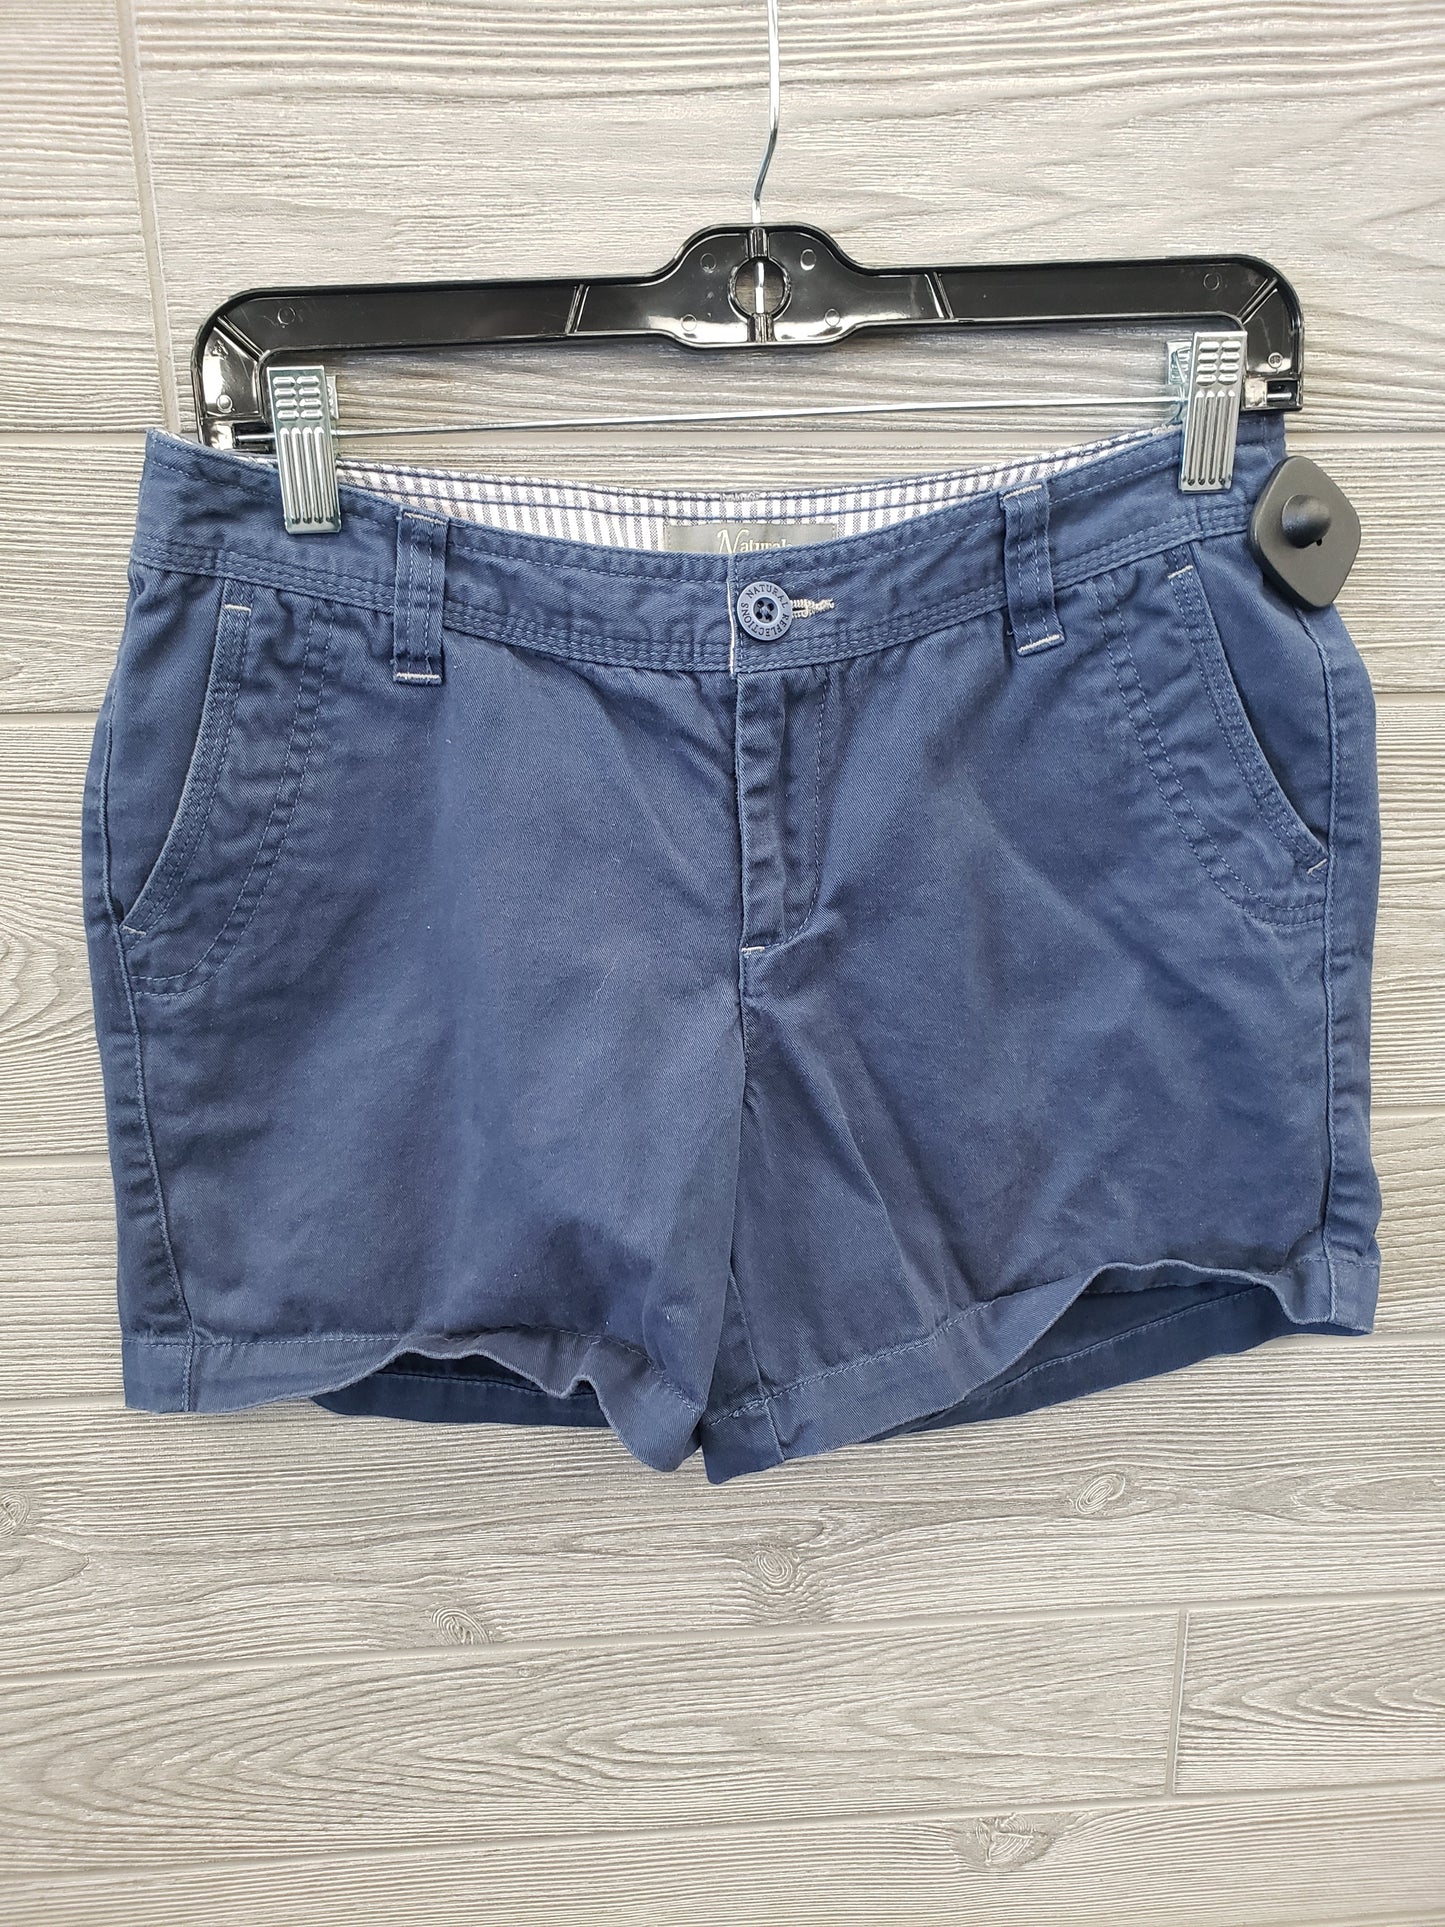 SHORTS BY NATURAL REFLECTION SIZE 4